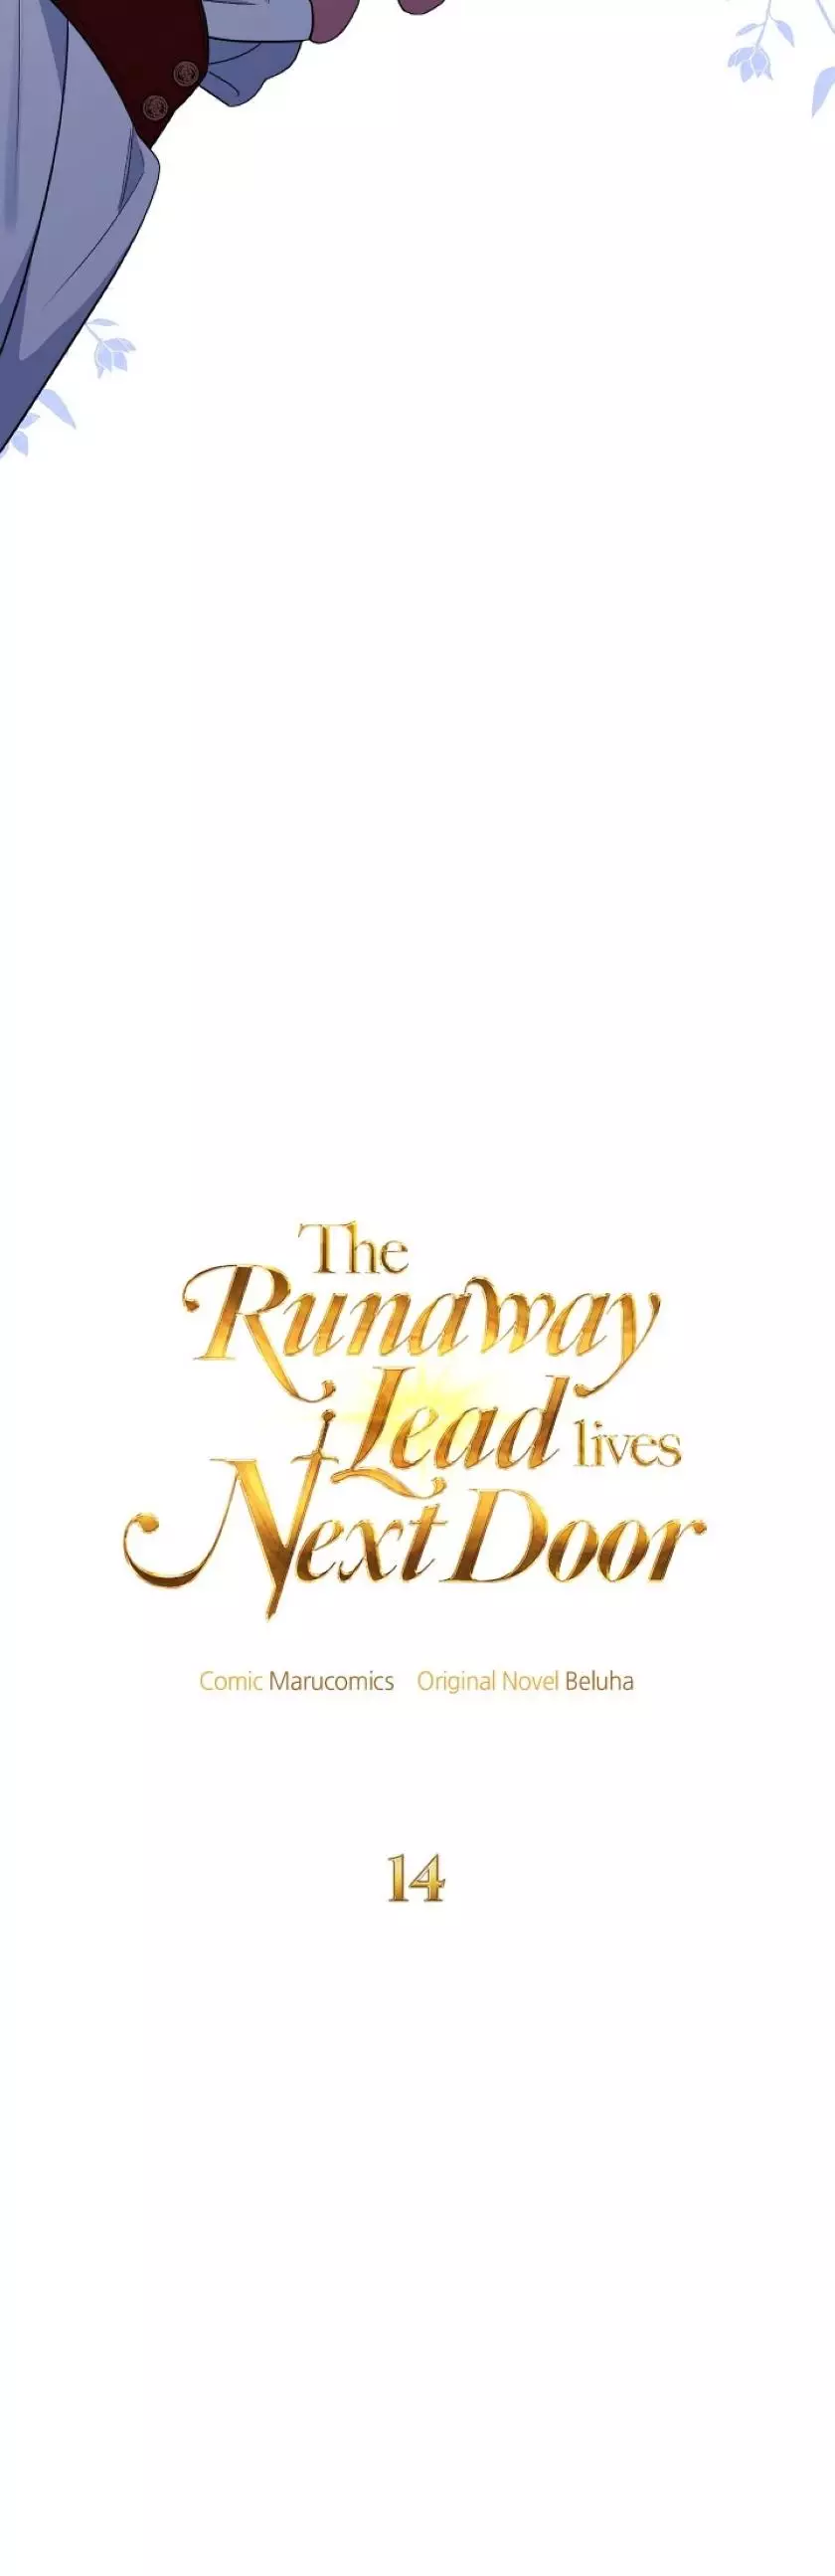 The Runaway Lead Lives Next Door - 14 page 5-c9a7974a